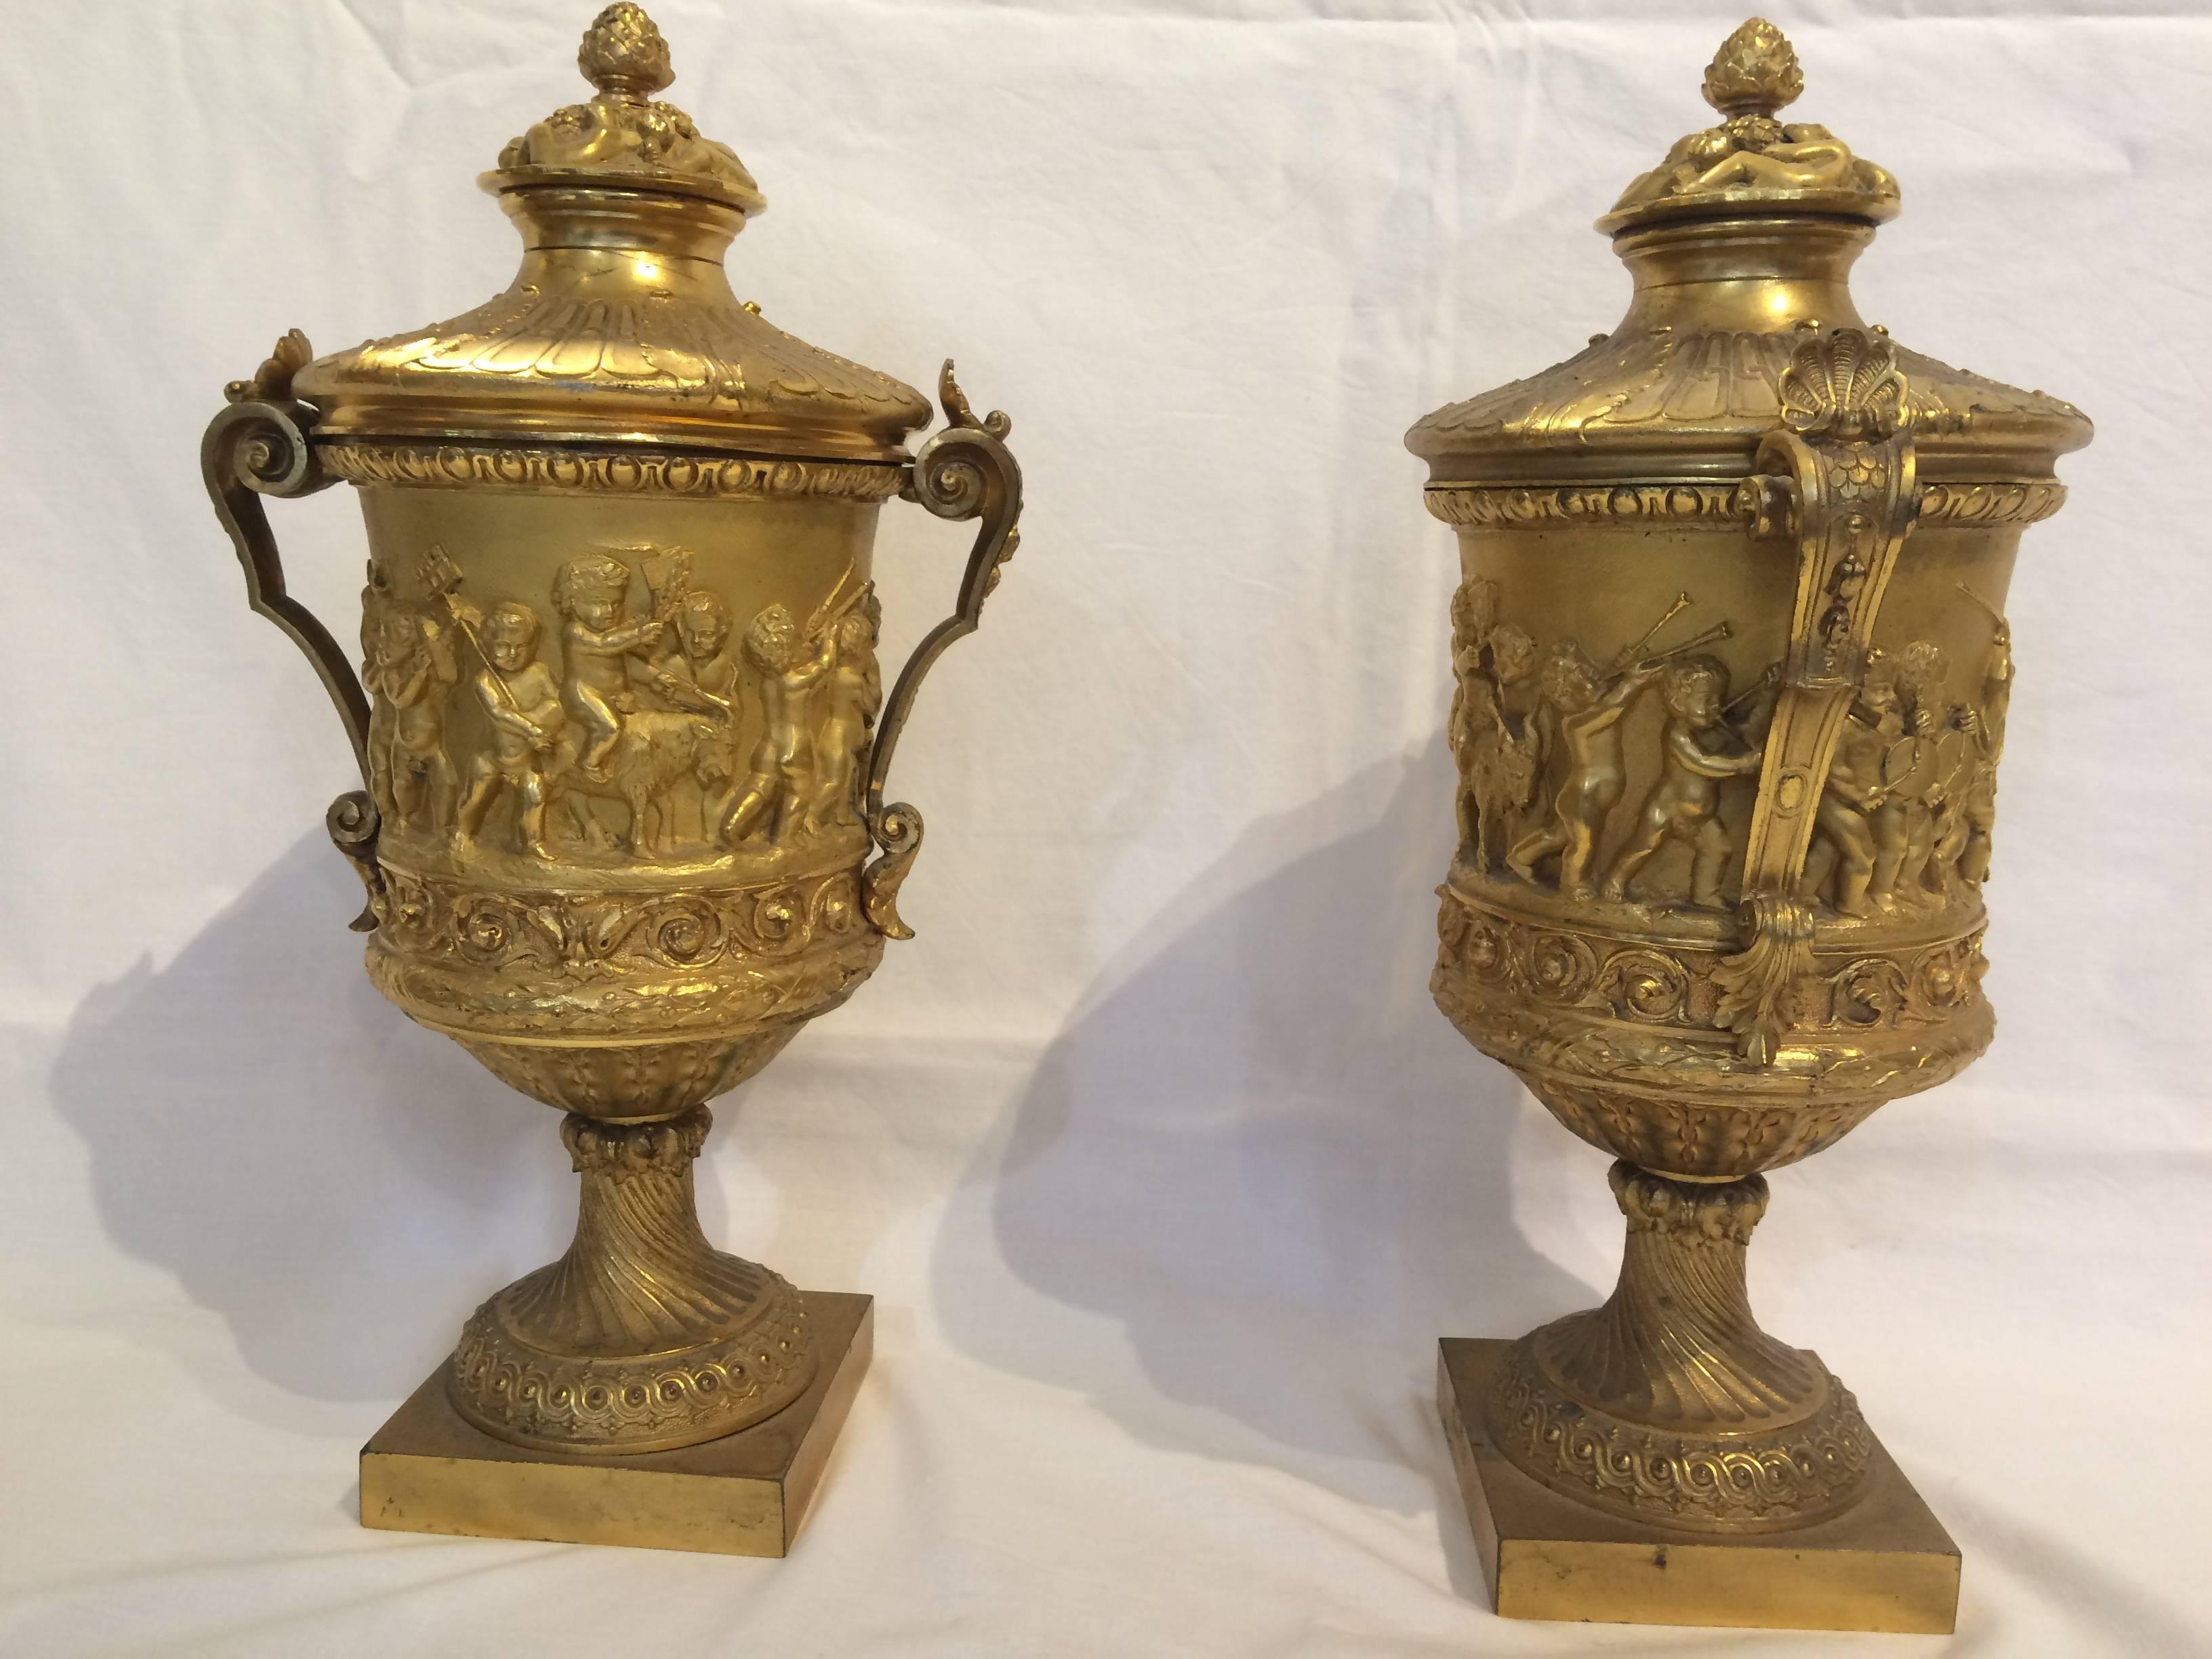 Beautiful pair of gilded bronze vases with tops, attributed to Beurdeley, 19th century, French.
After Clodion.